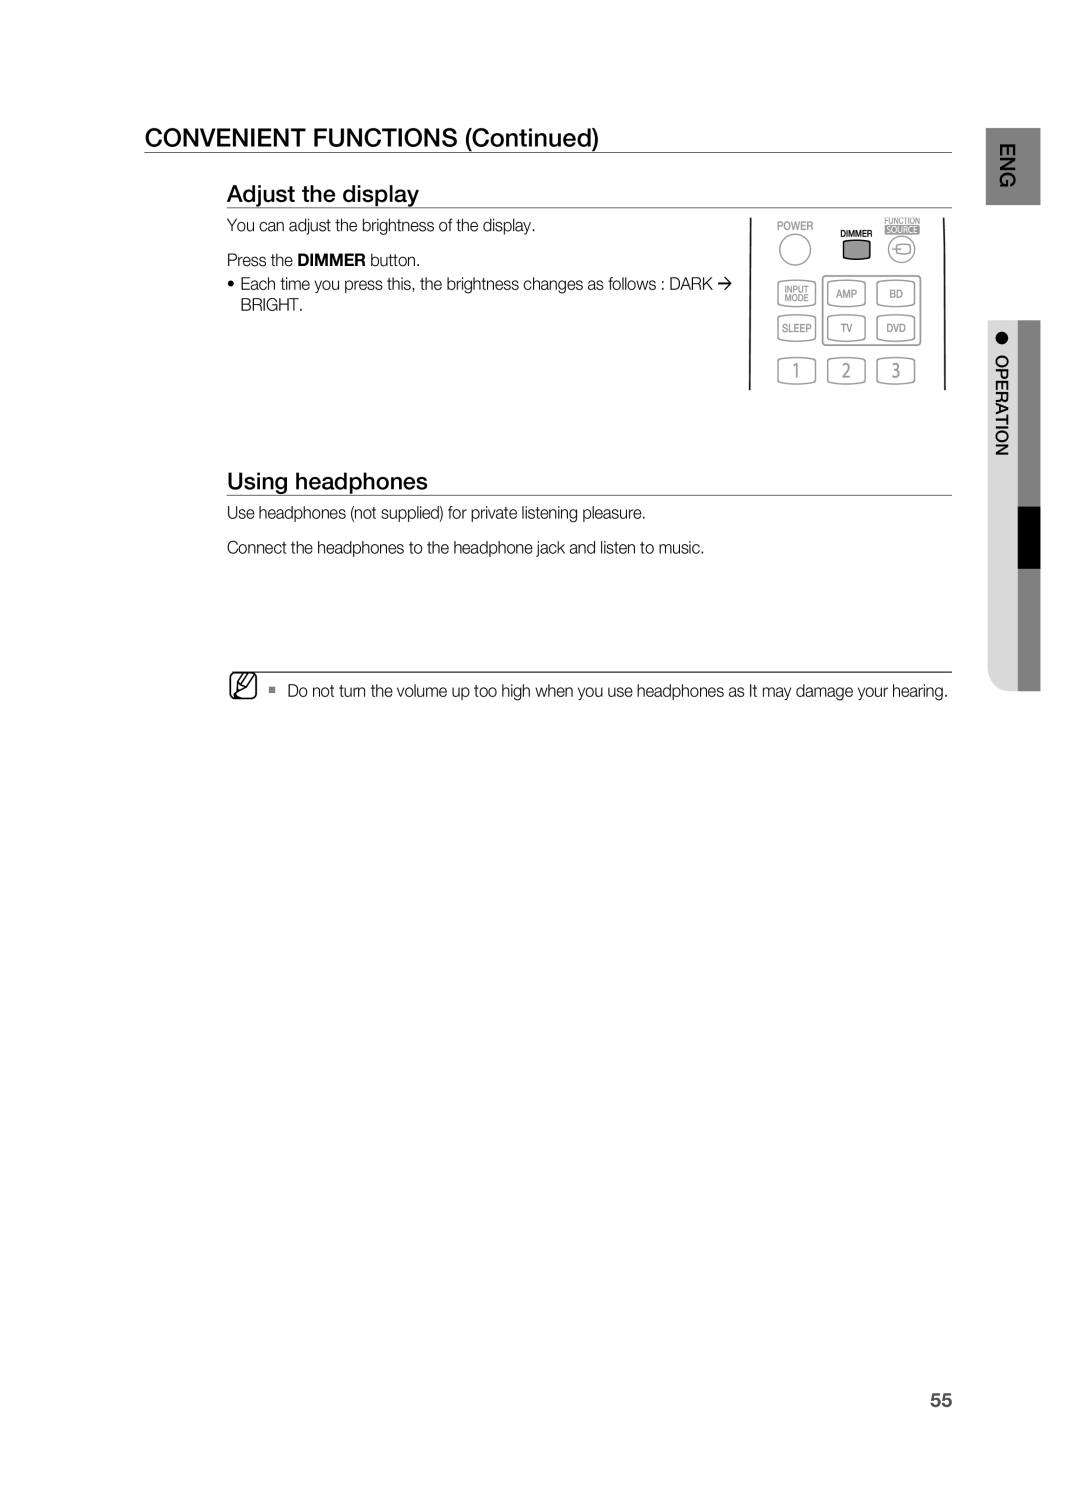 Samsung HT-AS730ST user manual Convenient functions Continued, Adjust the display, Using headphones 